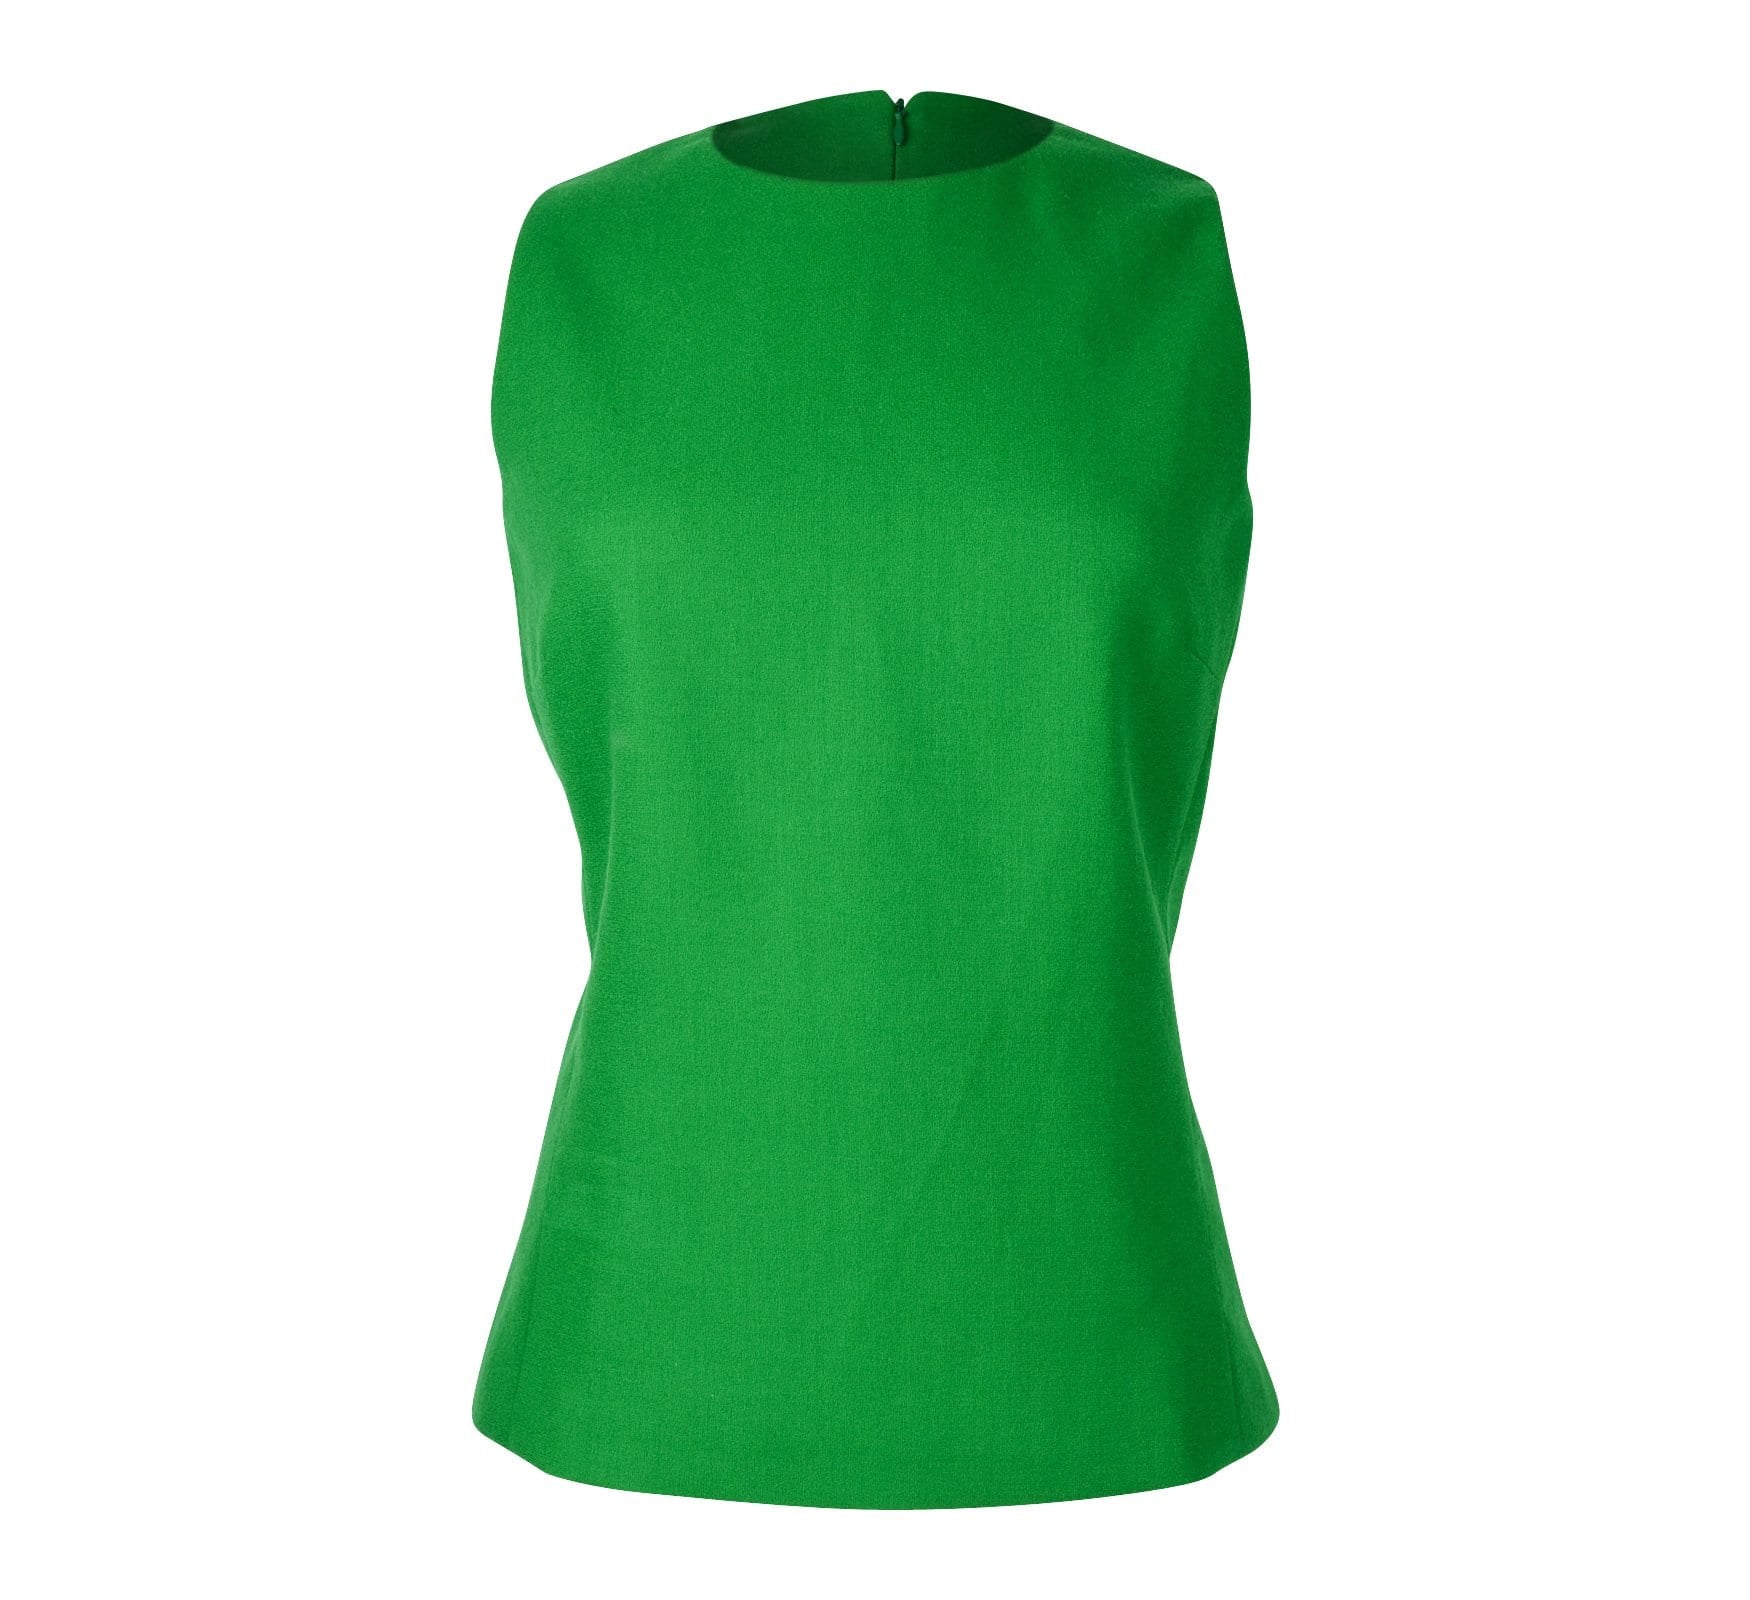 Christian Dior Top Emerald Green Sleeveless Shaped and Fitted fits 8 - mightychic